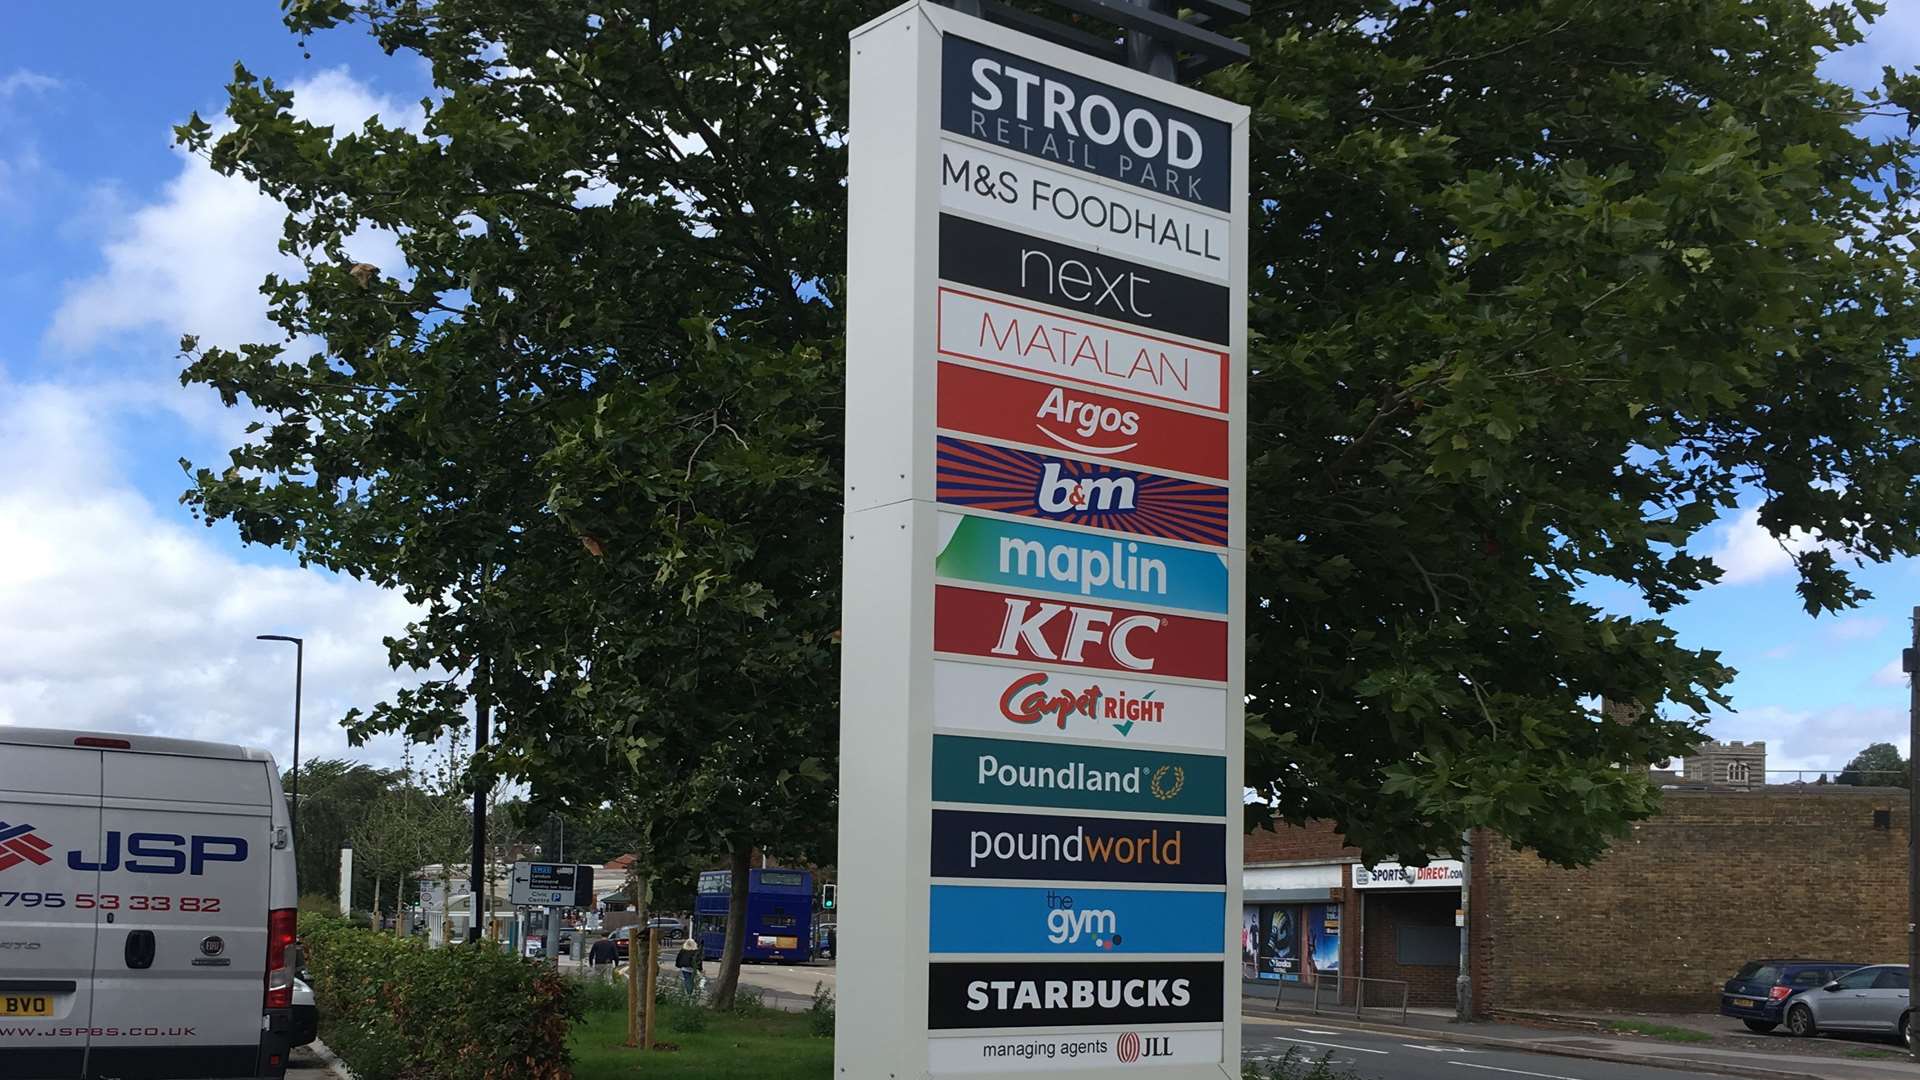 The retail park has several new names